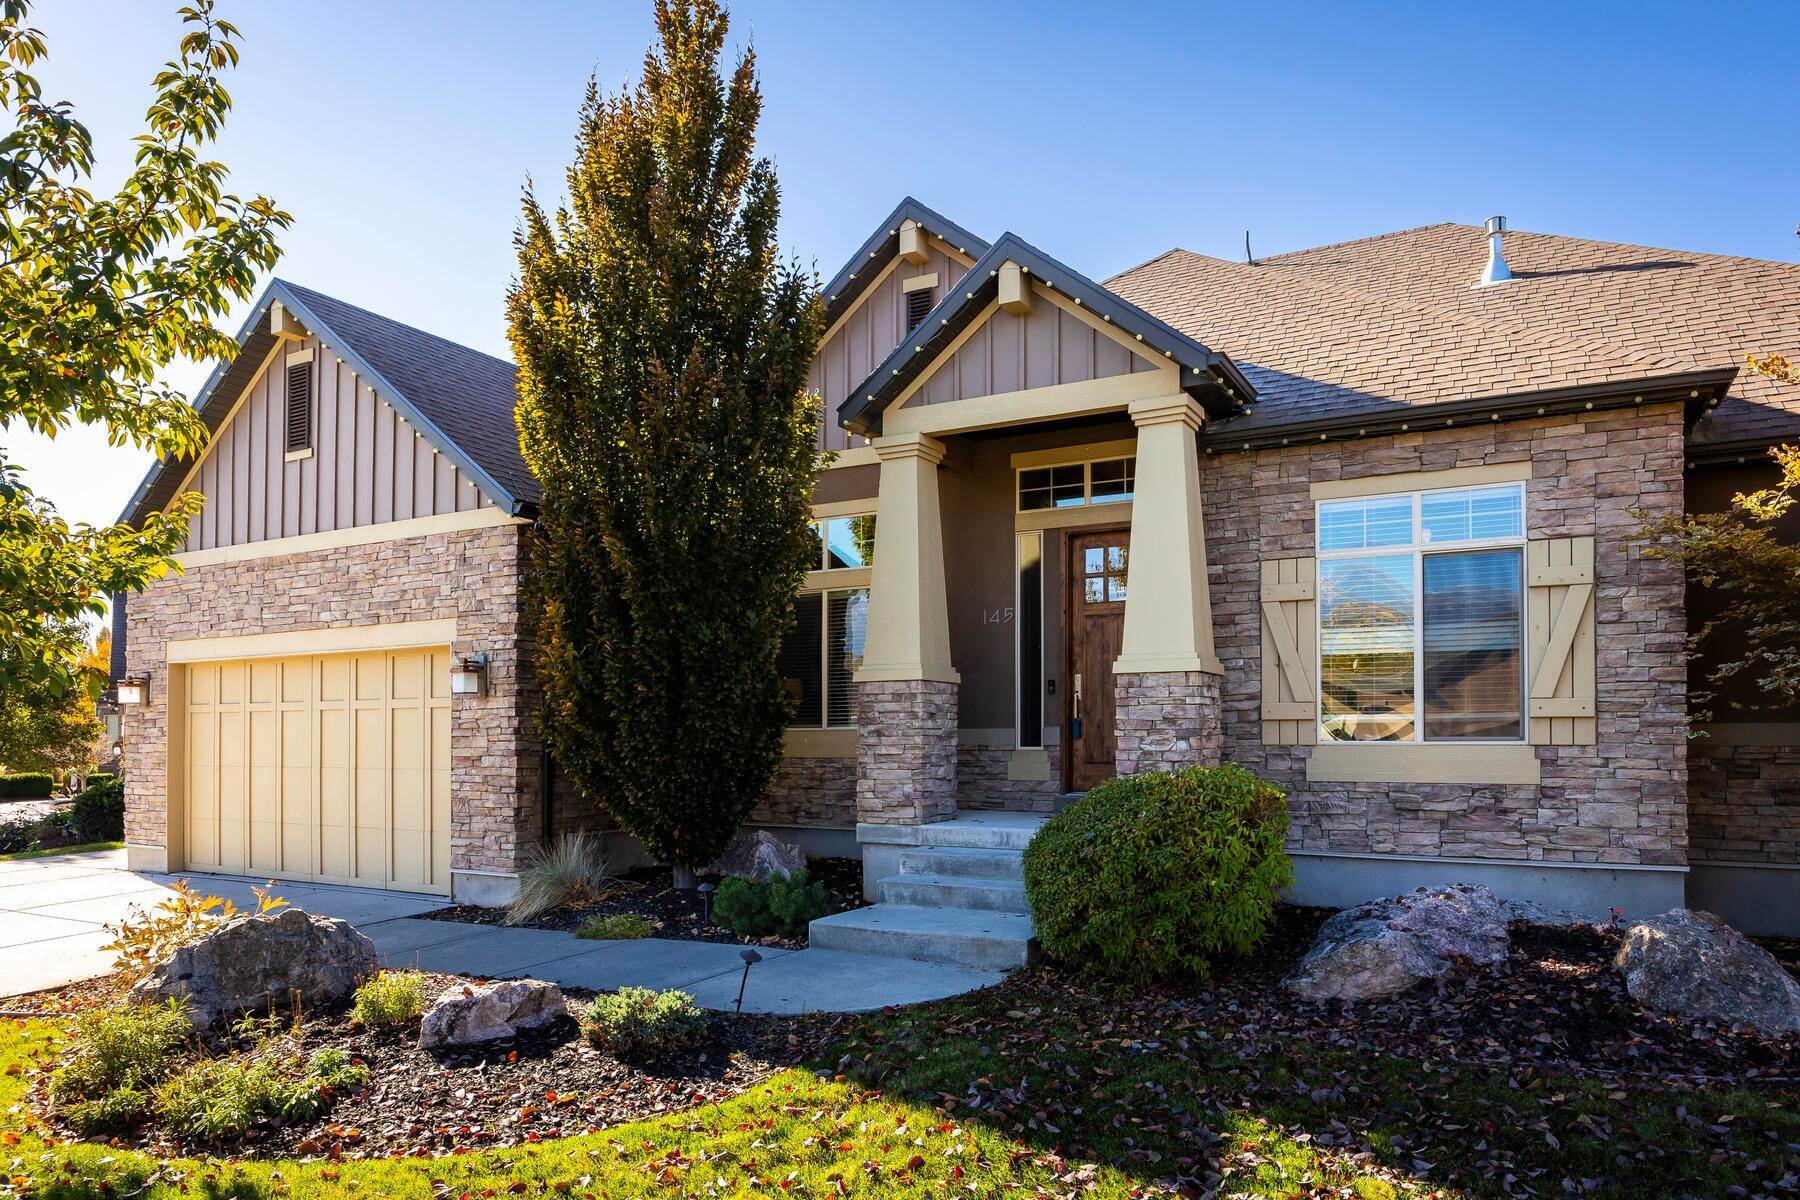 Single Family Homes for Sale at Stunning Home in a Highly Sought Out Mountain Vistas Neighborhood 145 Vista View Drive Kaysville, Utah 84037 United States